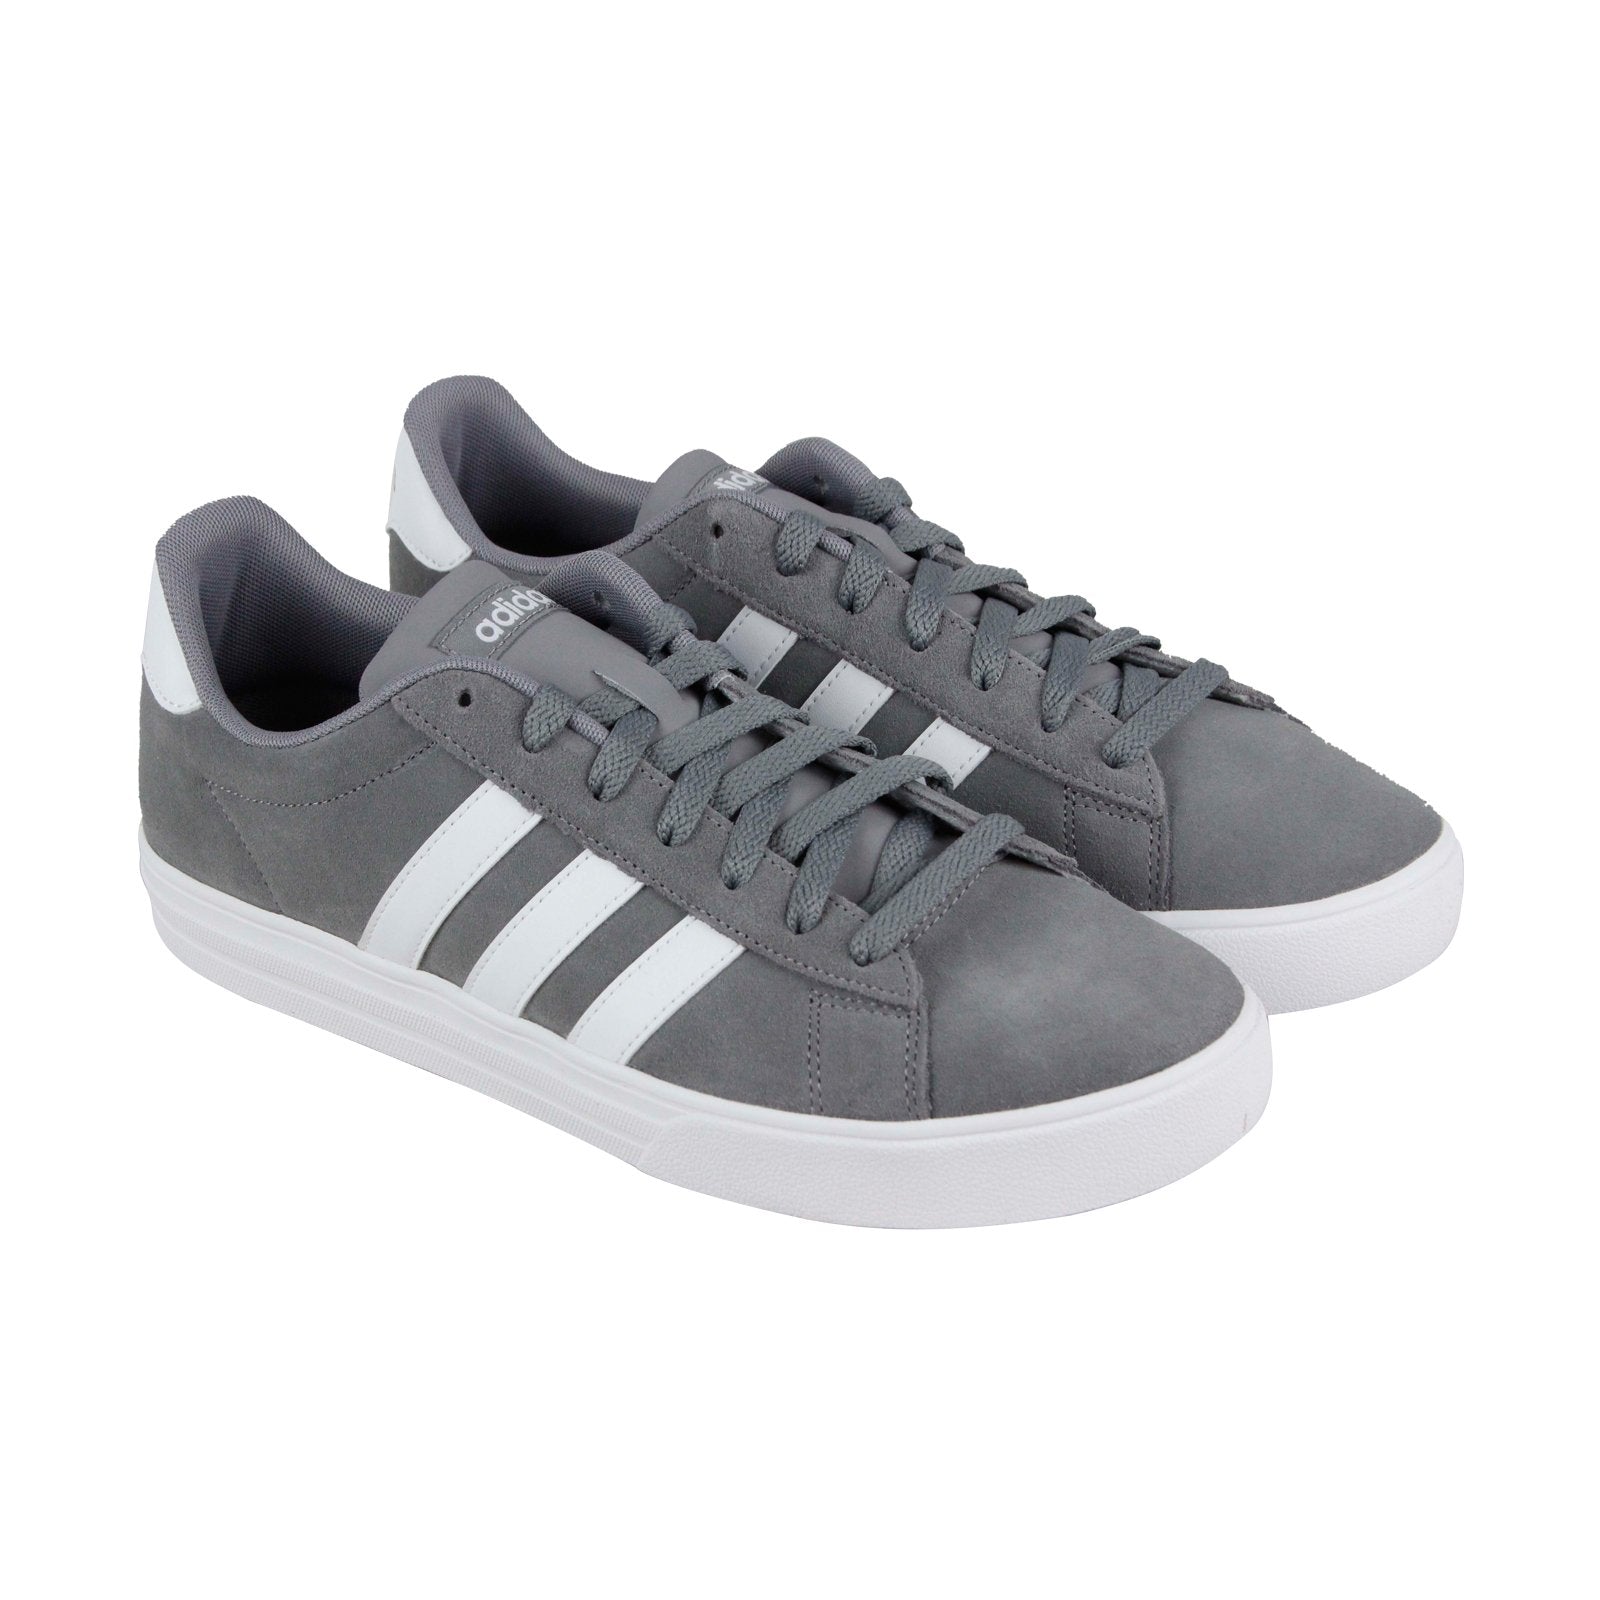 verfrommeld Profetie of Adidas Daily 2.0 DB0156 Mens Gray Suede Lace Up Lifestyle Sneakers Sho -  Ruze Shoes